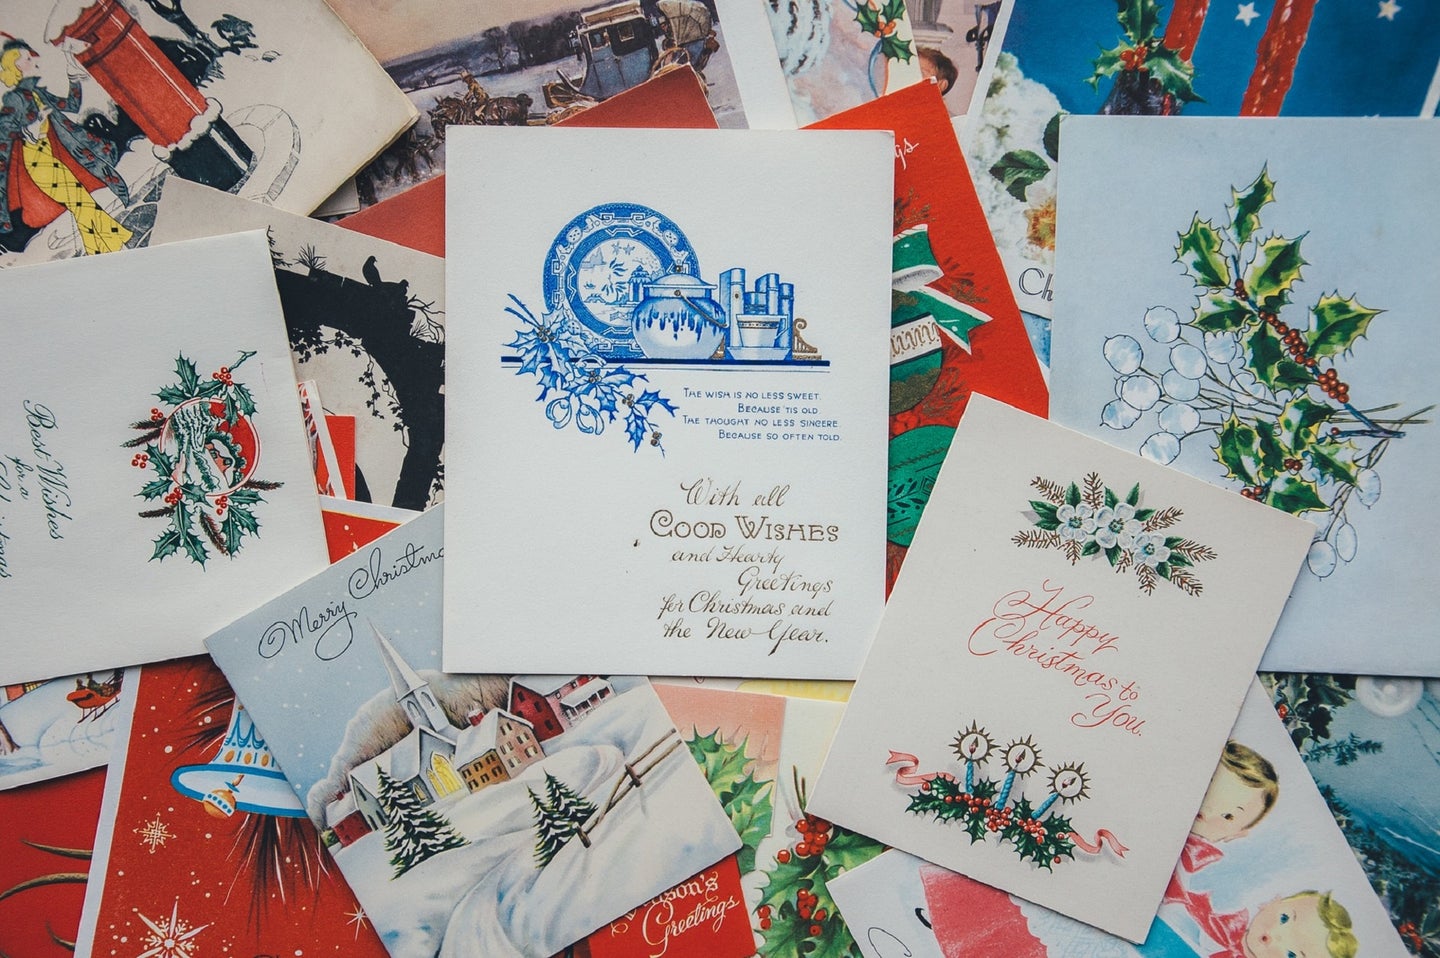 Pile of holiday cards that can be recycled to reduce waste